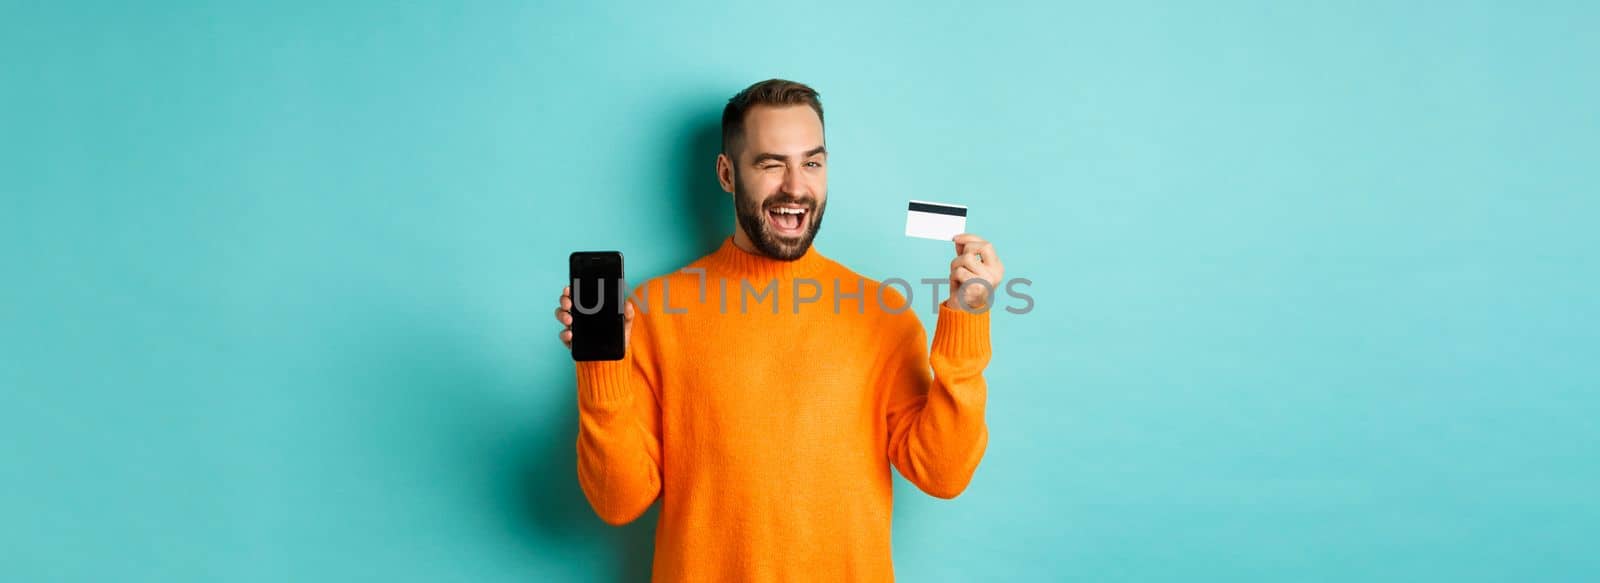 Online shopping. Handsome caucasian man showing credit card and smartphone, winking at camera, recommending something, standing over light blue background.